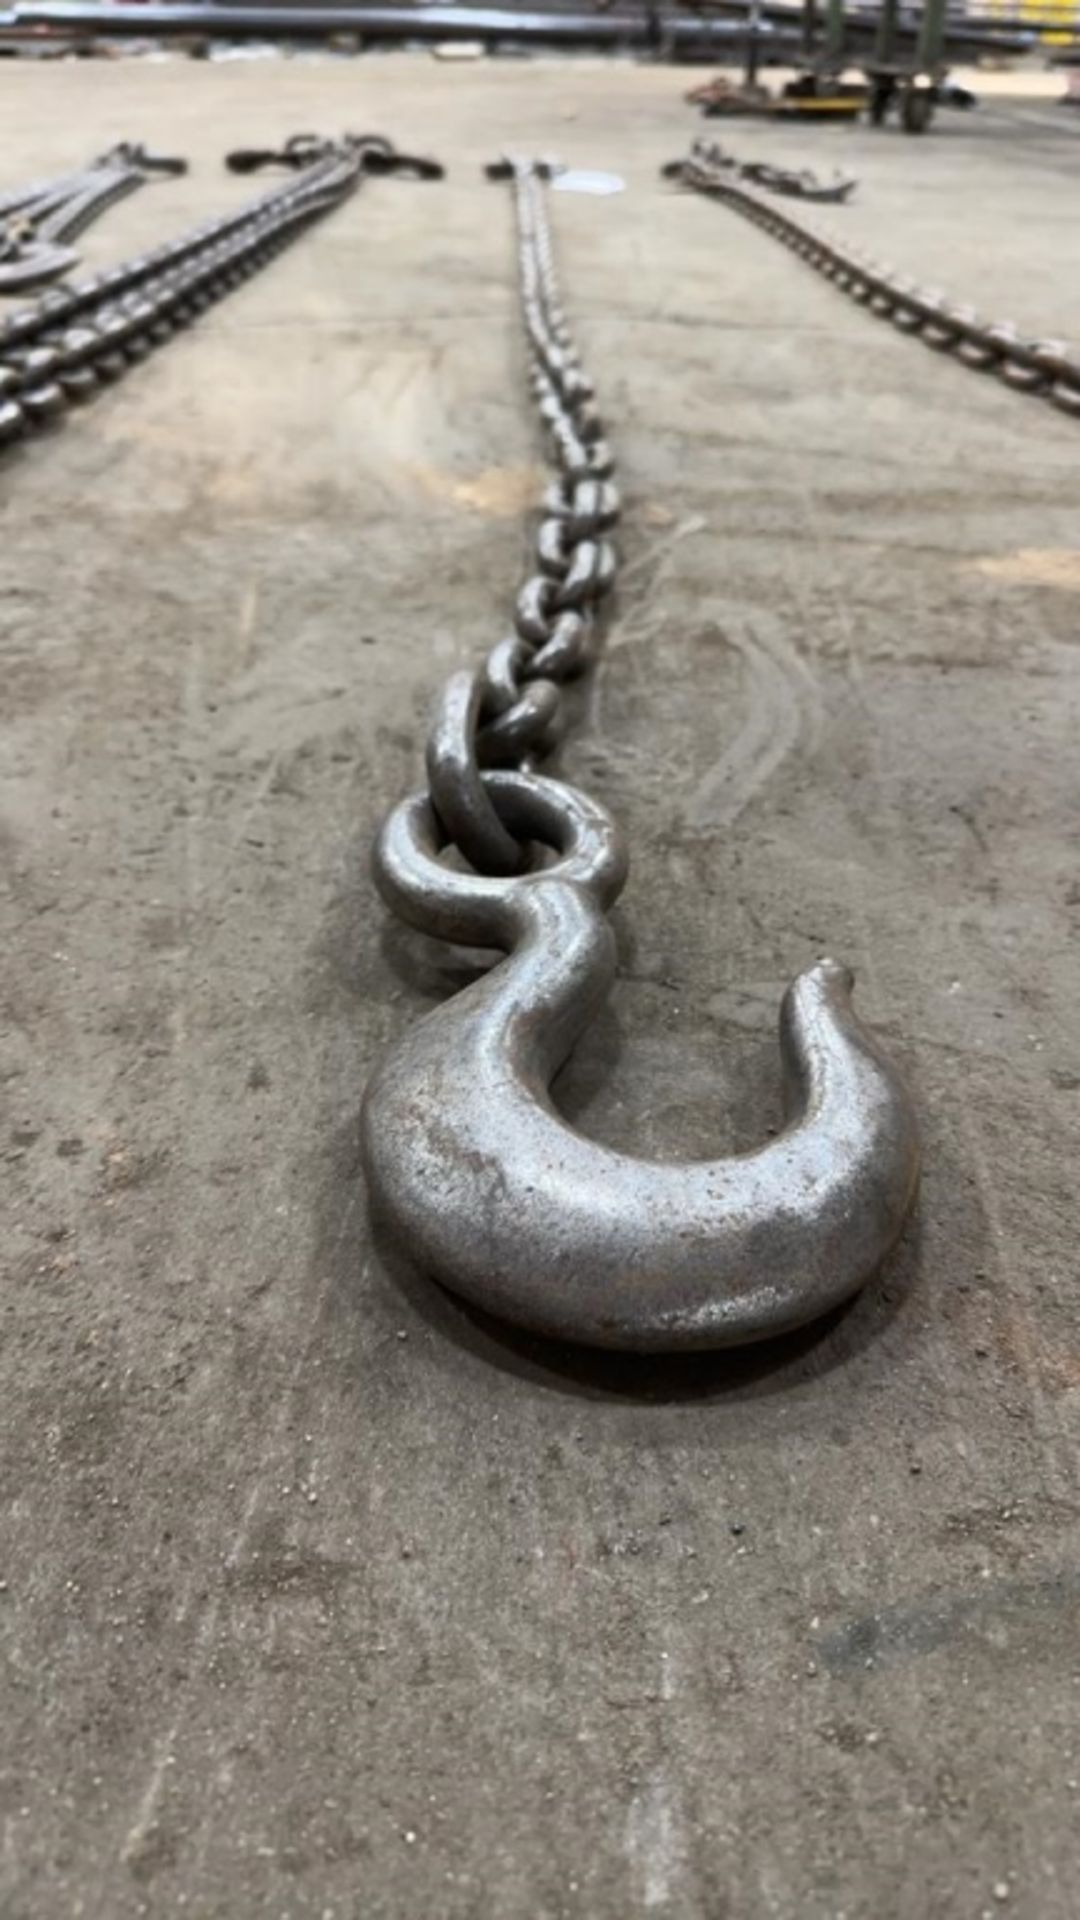 8ft Chain on Rigging Ring with Hoist Hook - Image 2 of 4